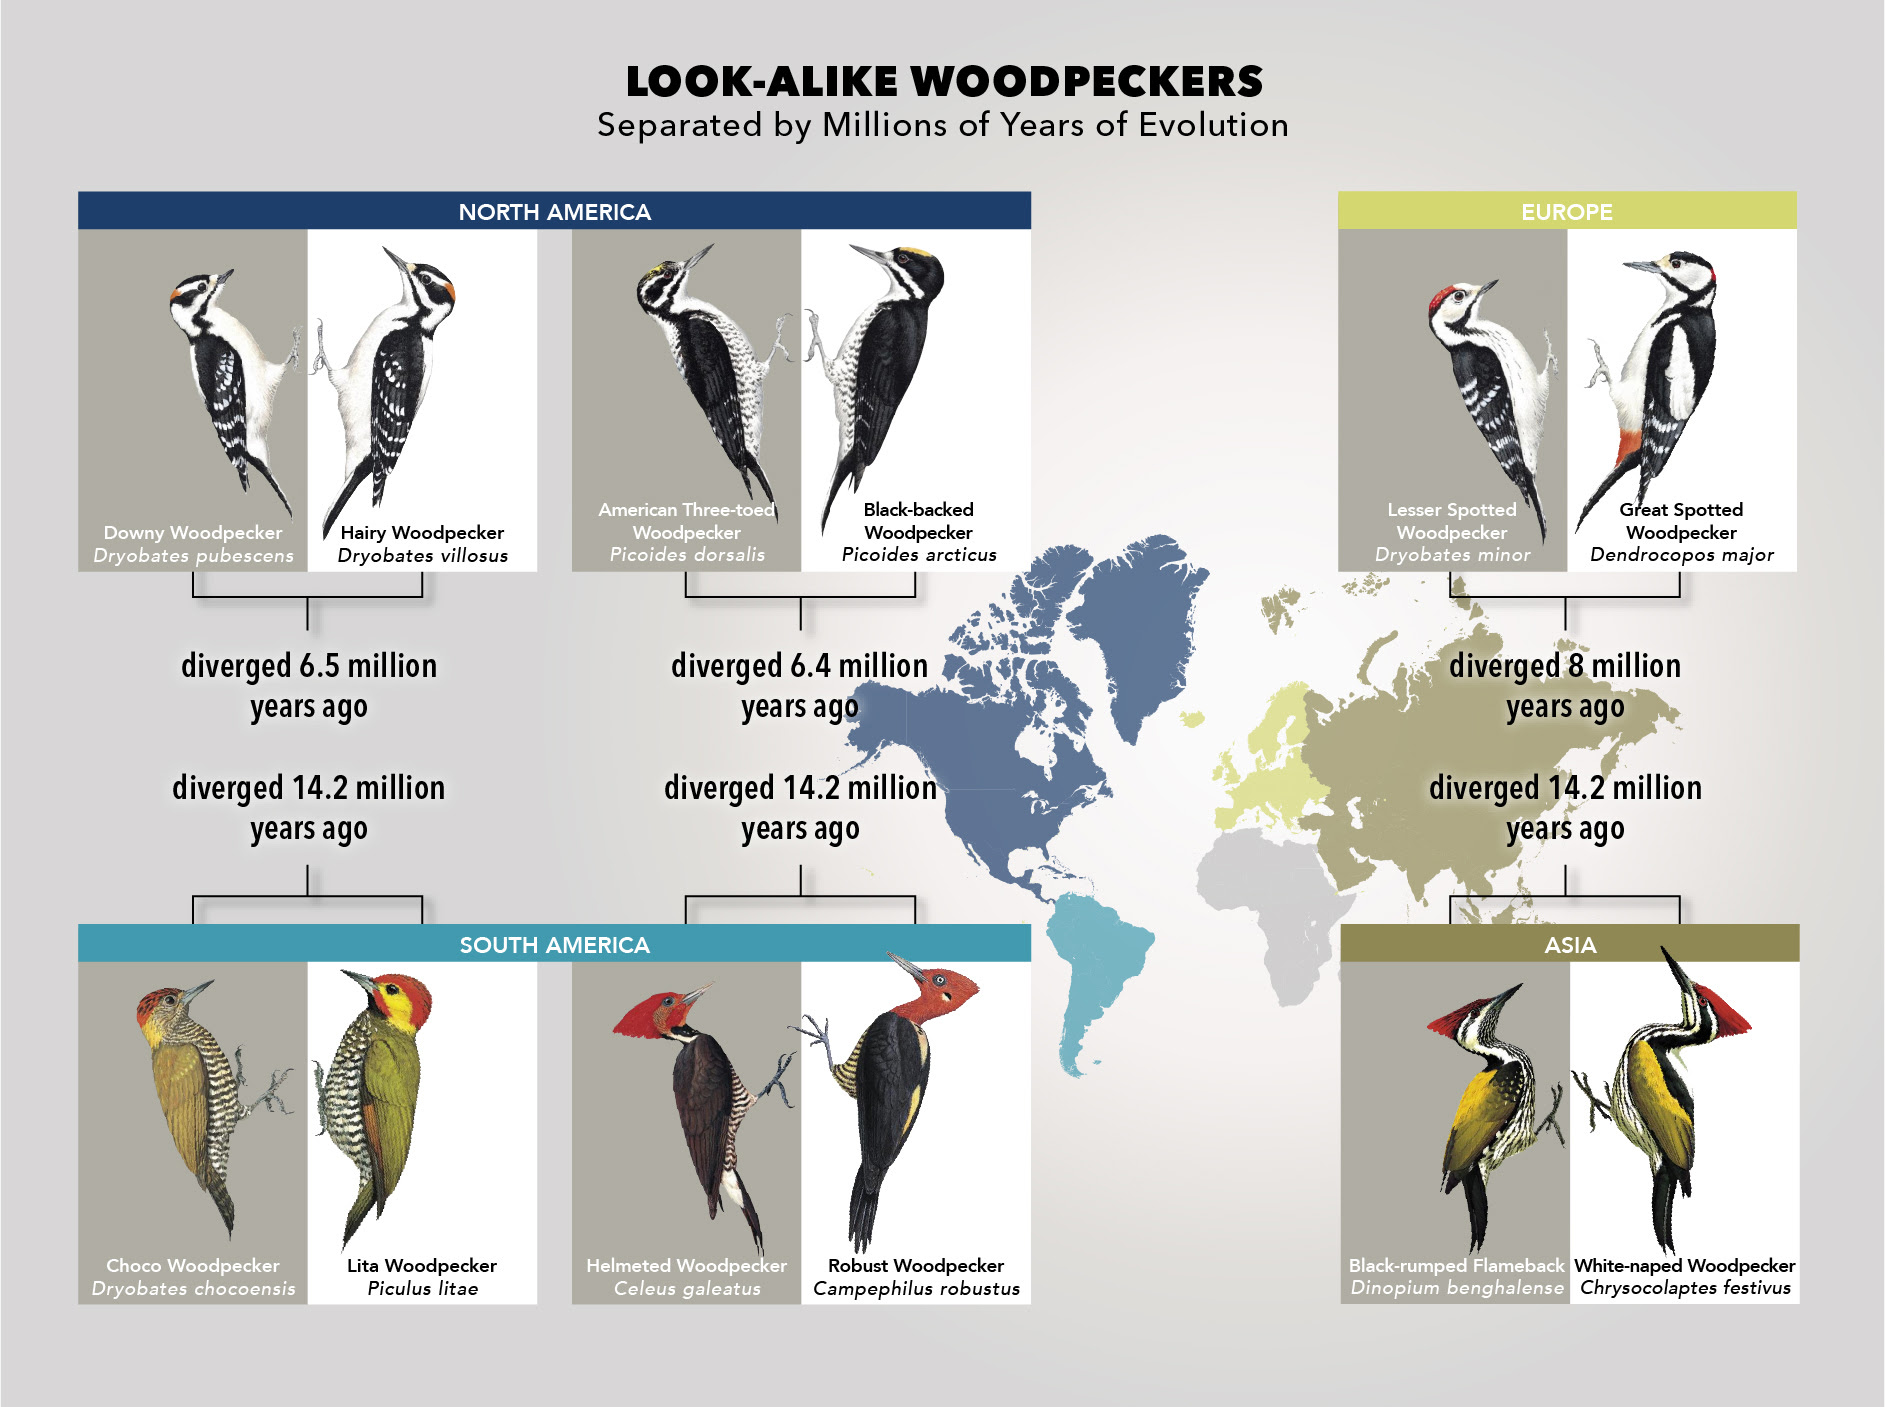 examples of woodpecker plumage mimicry from around the world